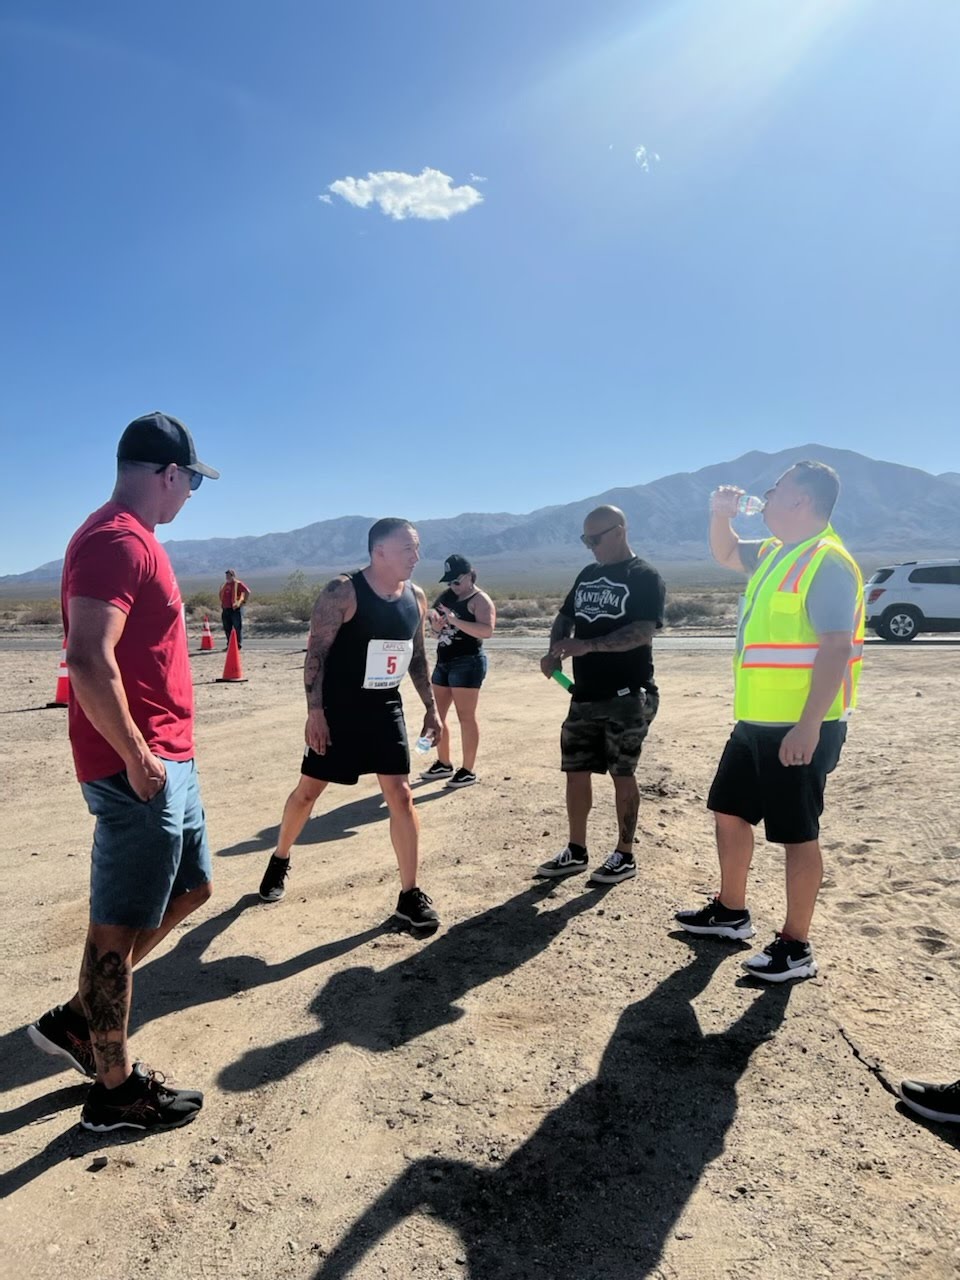 Ontario Police Department on Instagram: This past weekend Ontario PD  competed in the Baker to Vegas relay race which spans over 100 miles  through the Las Vegas desert. It was our department's